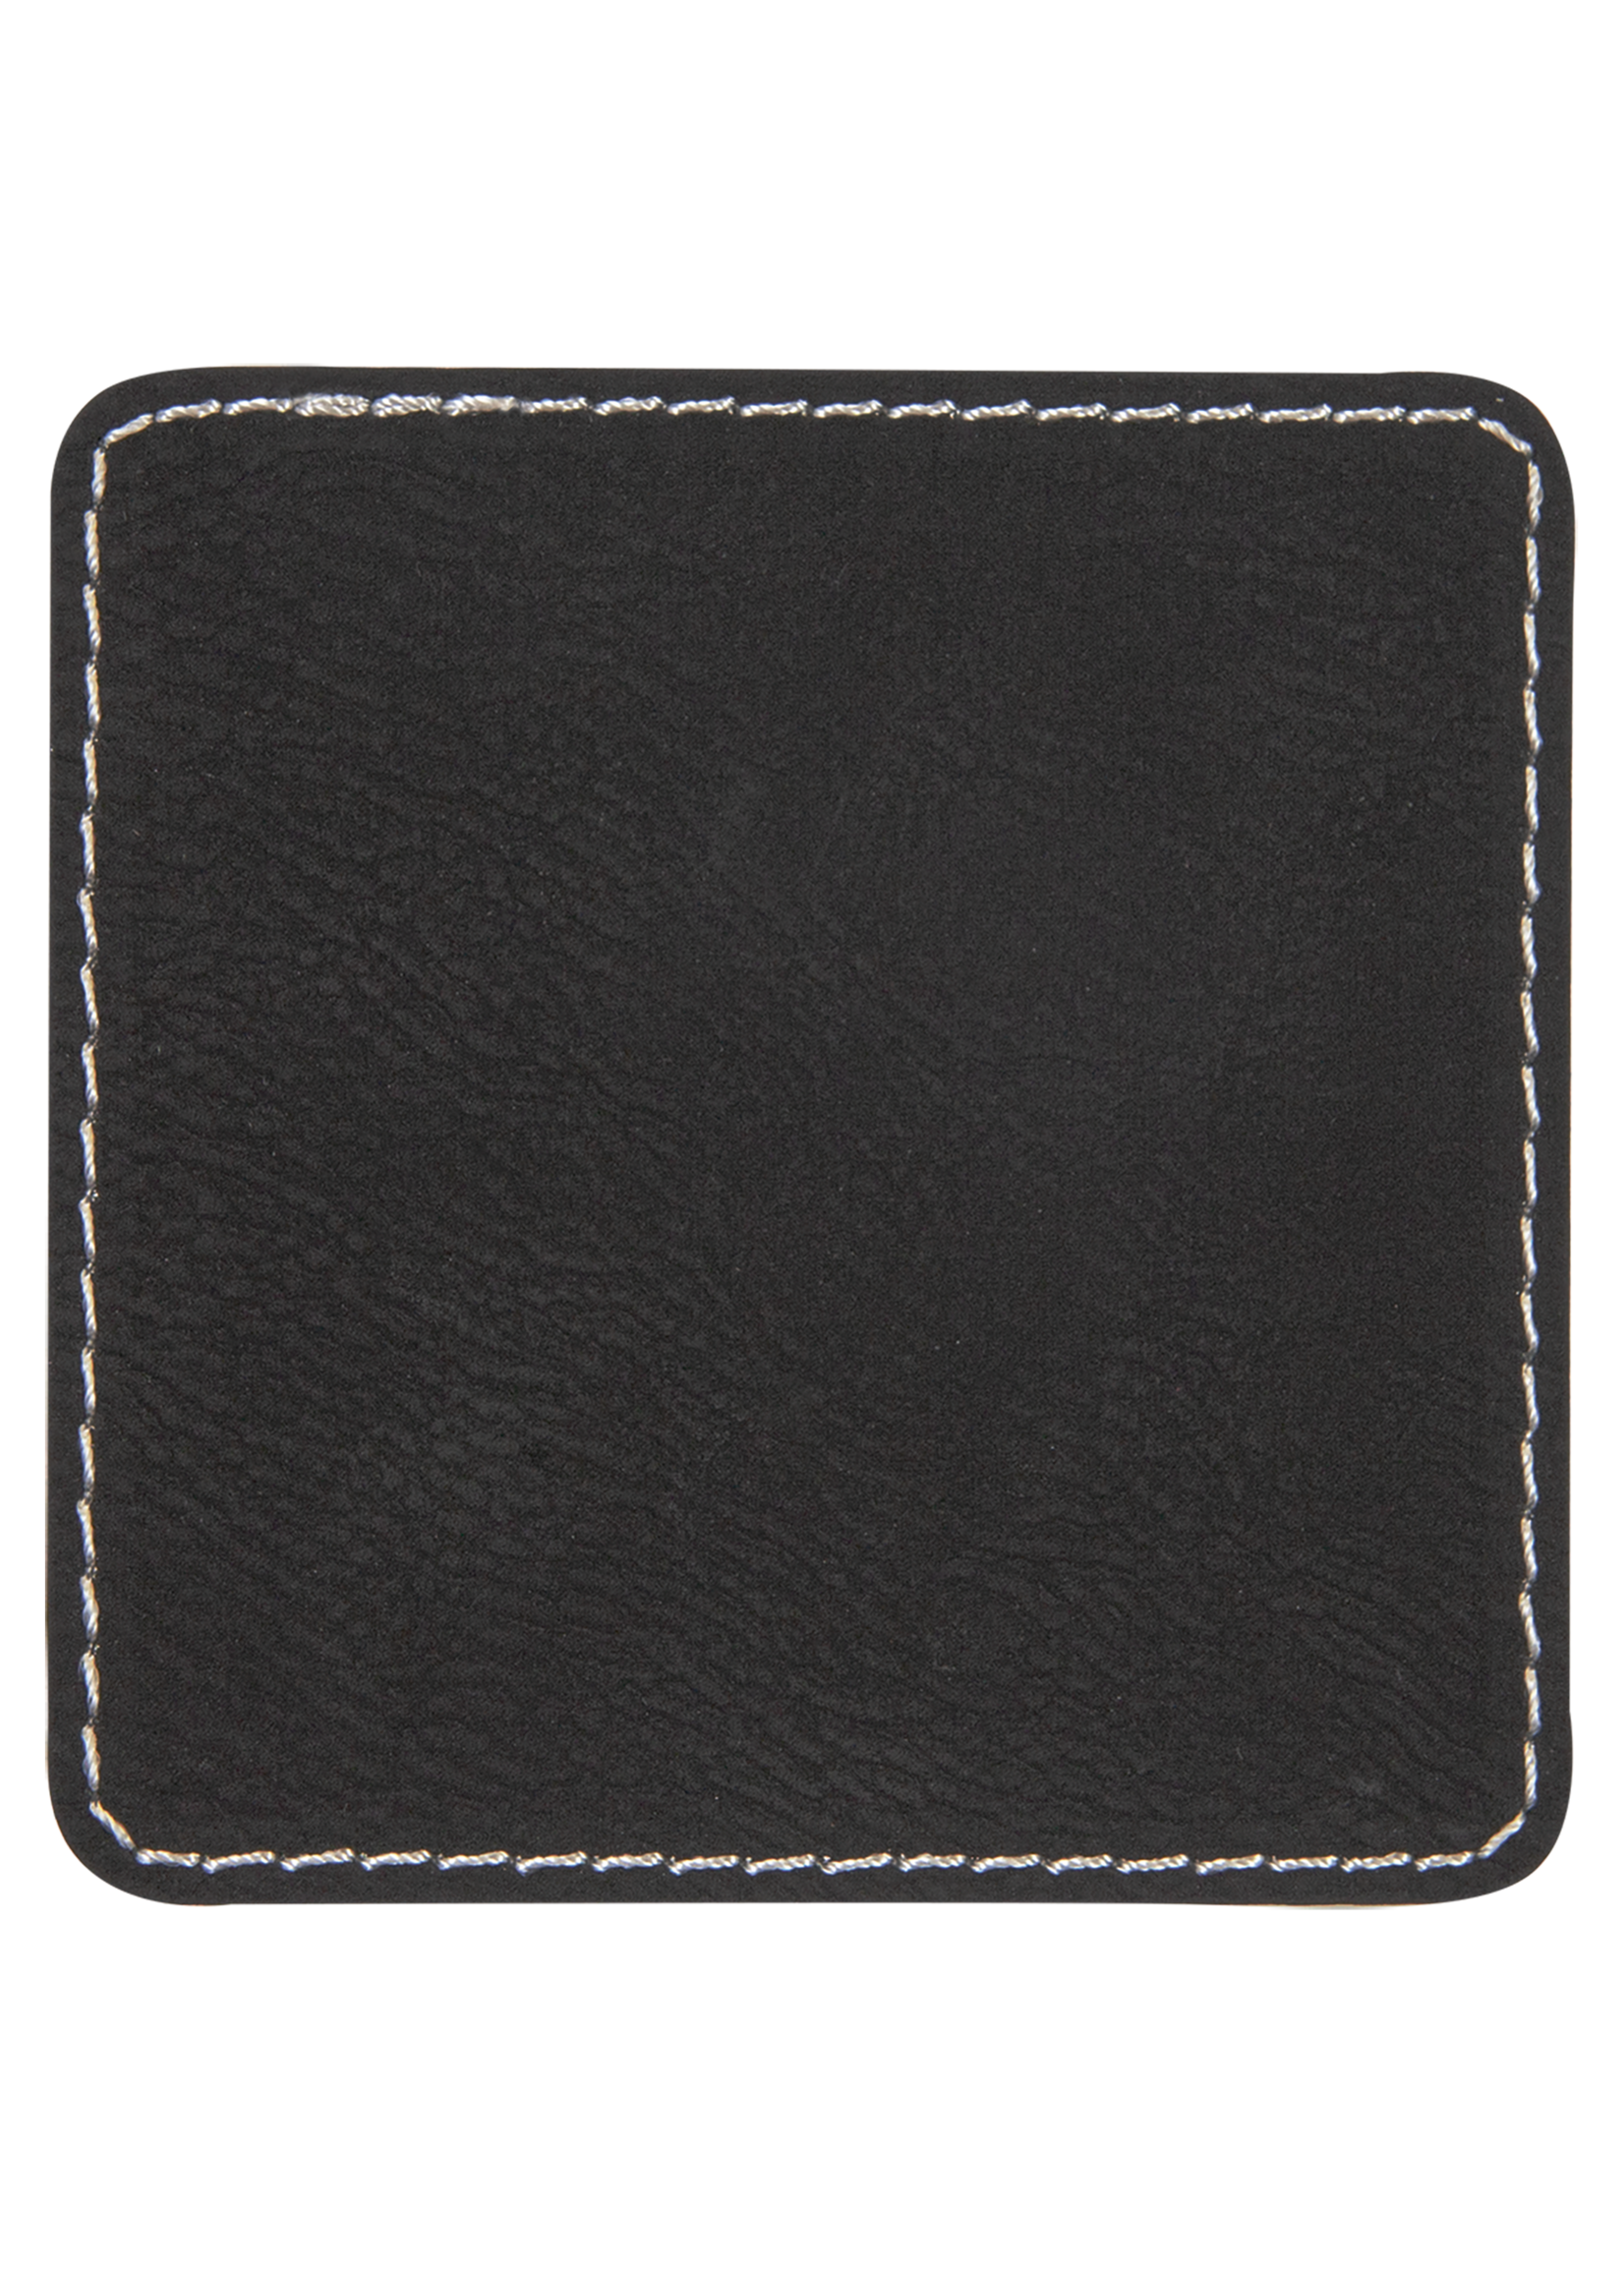 Square Leatherette Patches